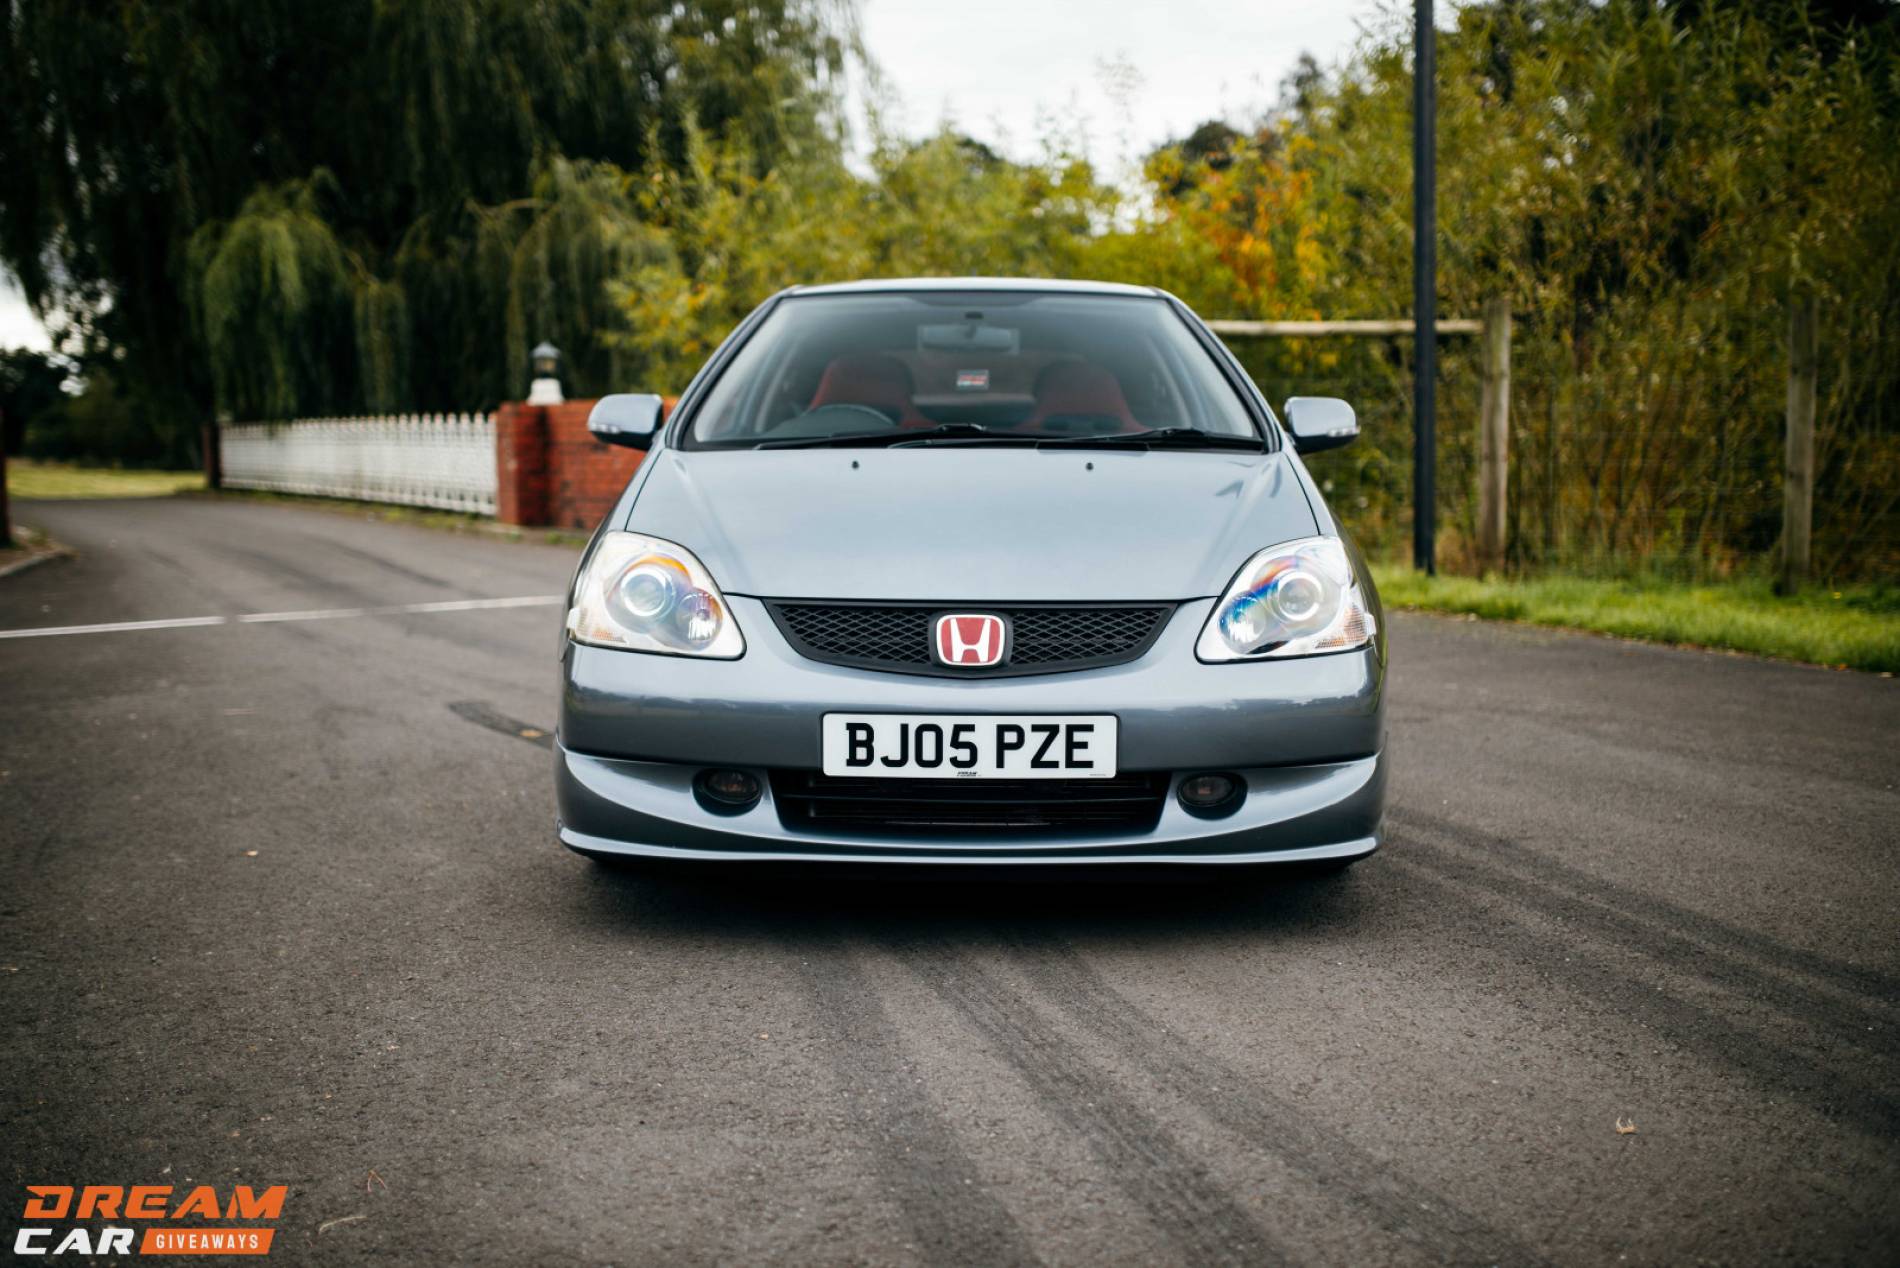 300HP Supercharged Civic Type R & £1000 or £10,000 Tax Free